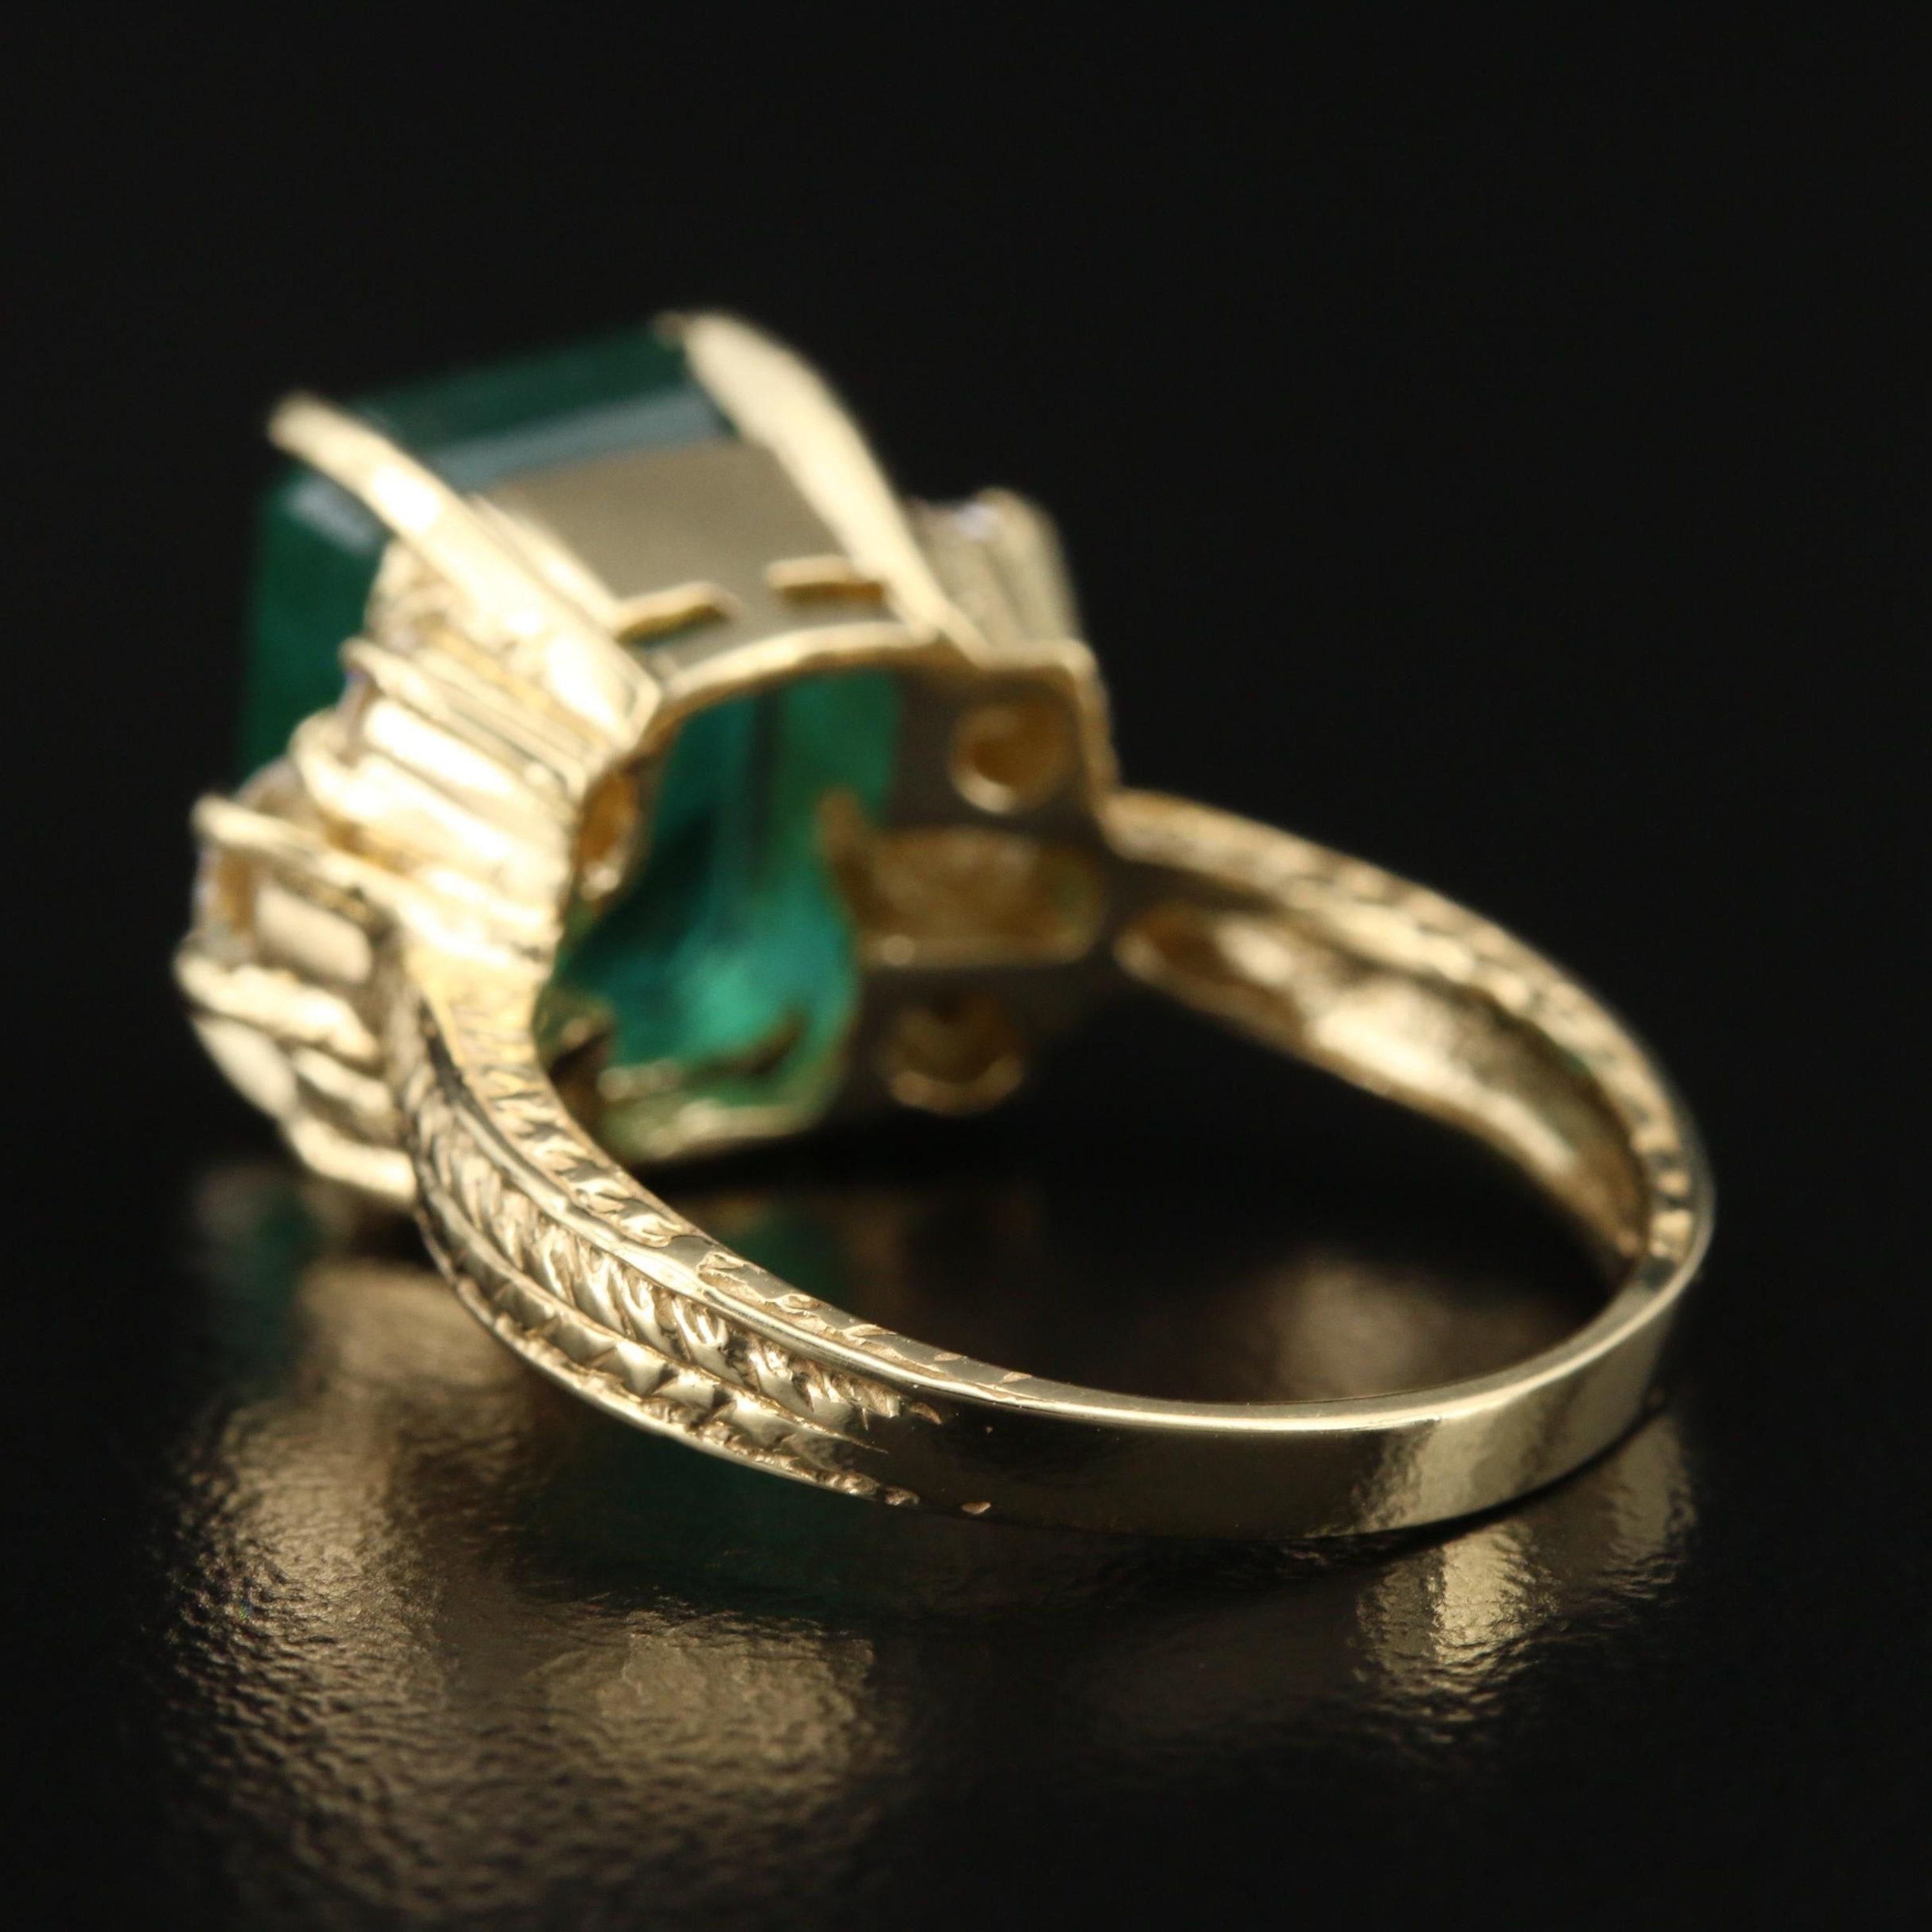 For Sale:  4 Carat Natural Emerald Diamond Engagement Ring Set in 18K Gold, Cocktail Ring 3